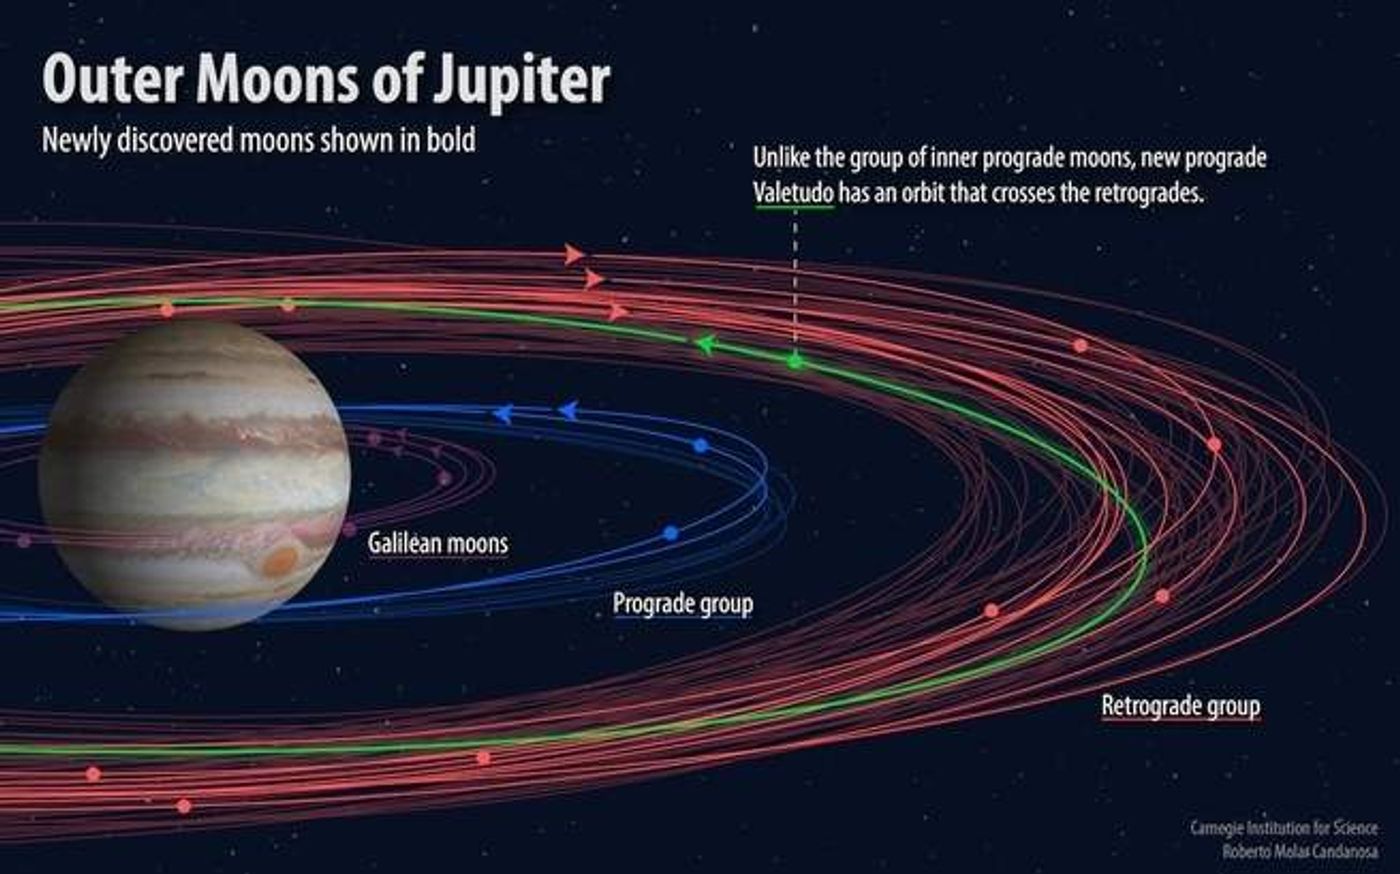 Jupiter has some newfound moons, according to astronomer Scott Sheppard and colleagues.